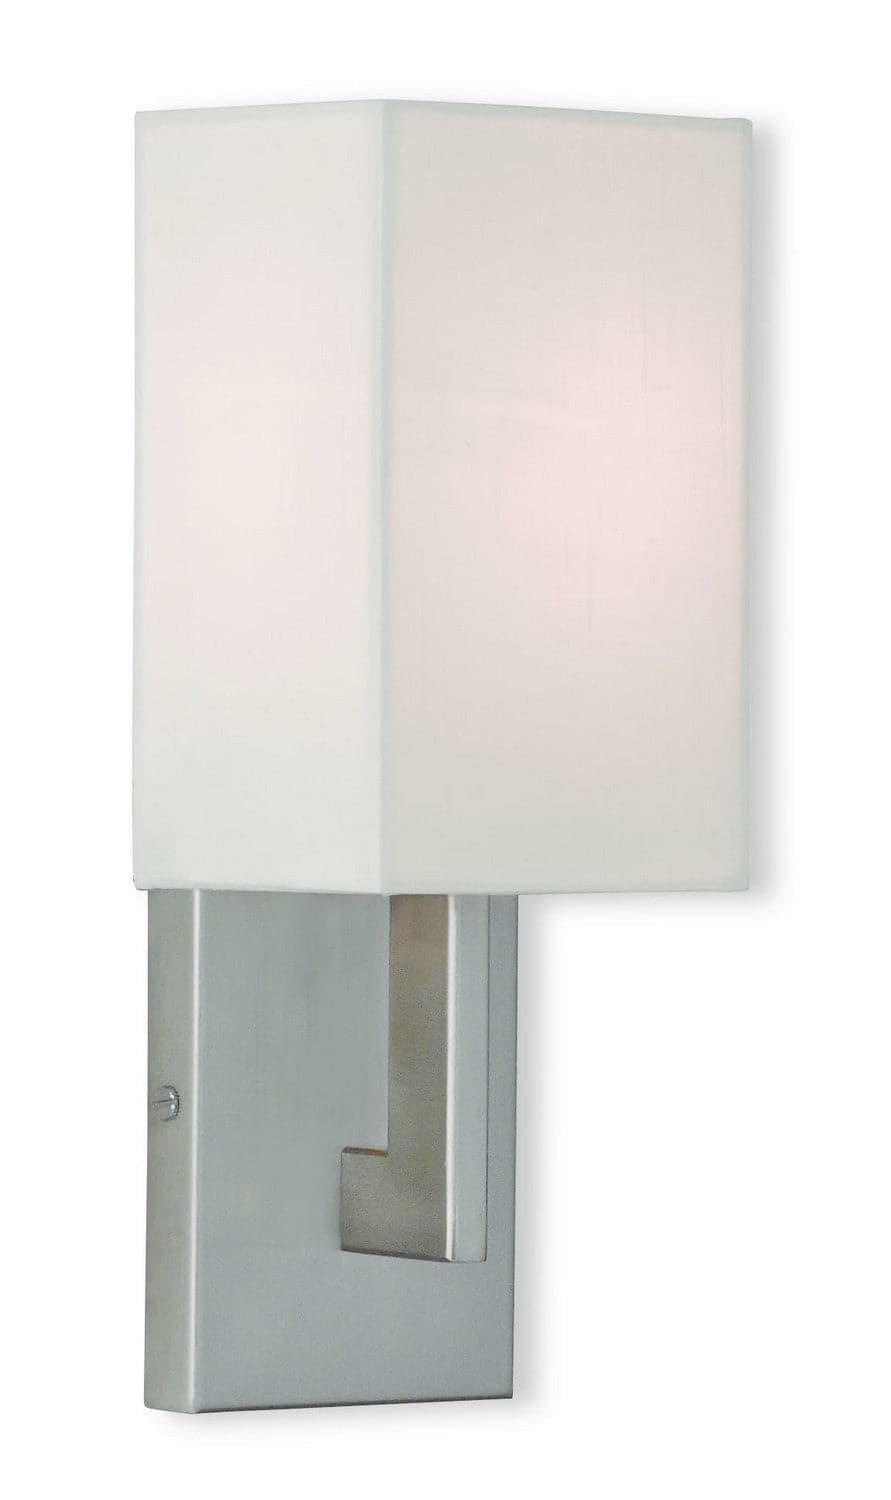 Livex Lighting - 51101-91 - One Light Wall Sconce - ADA Wall Sconces - Brushed Nickel